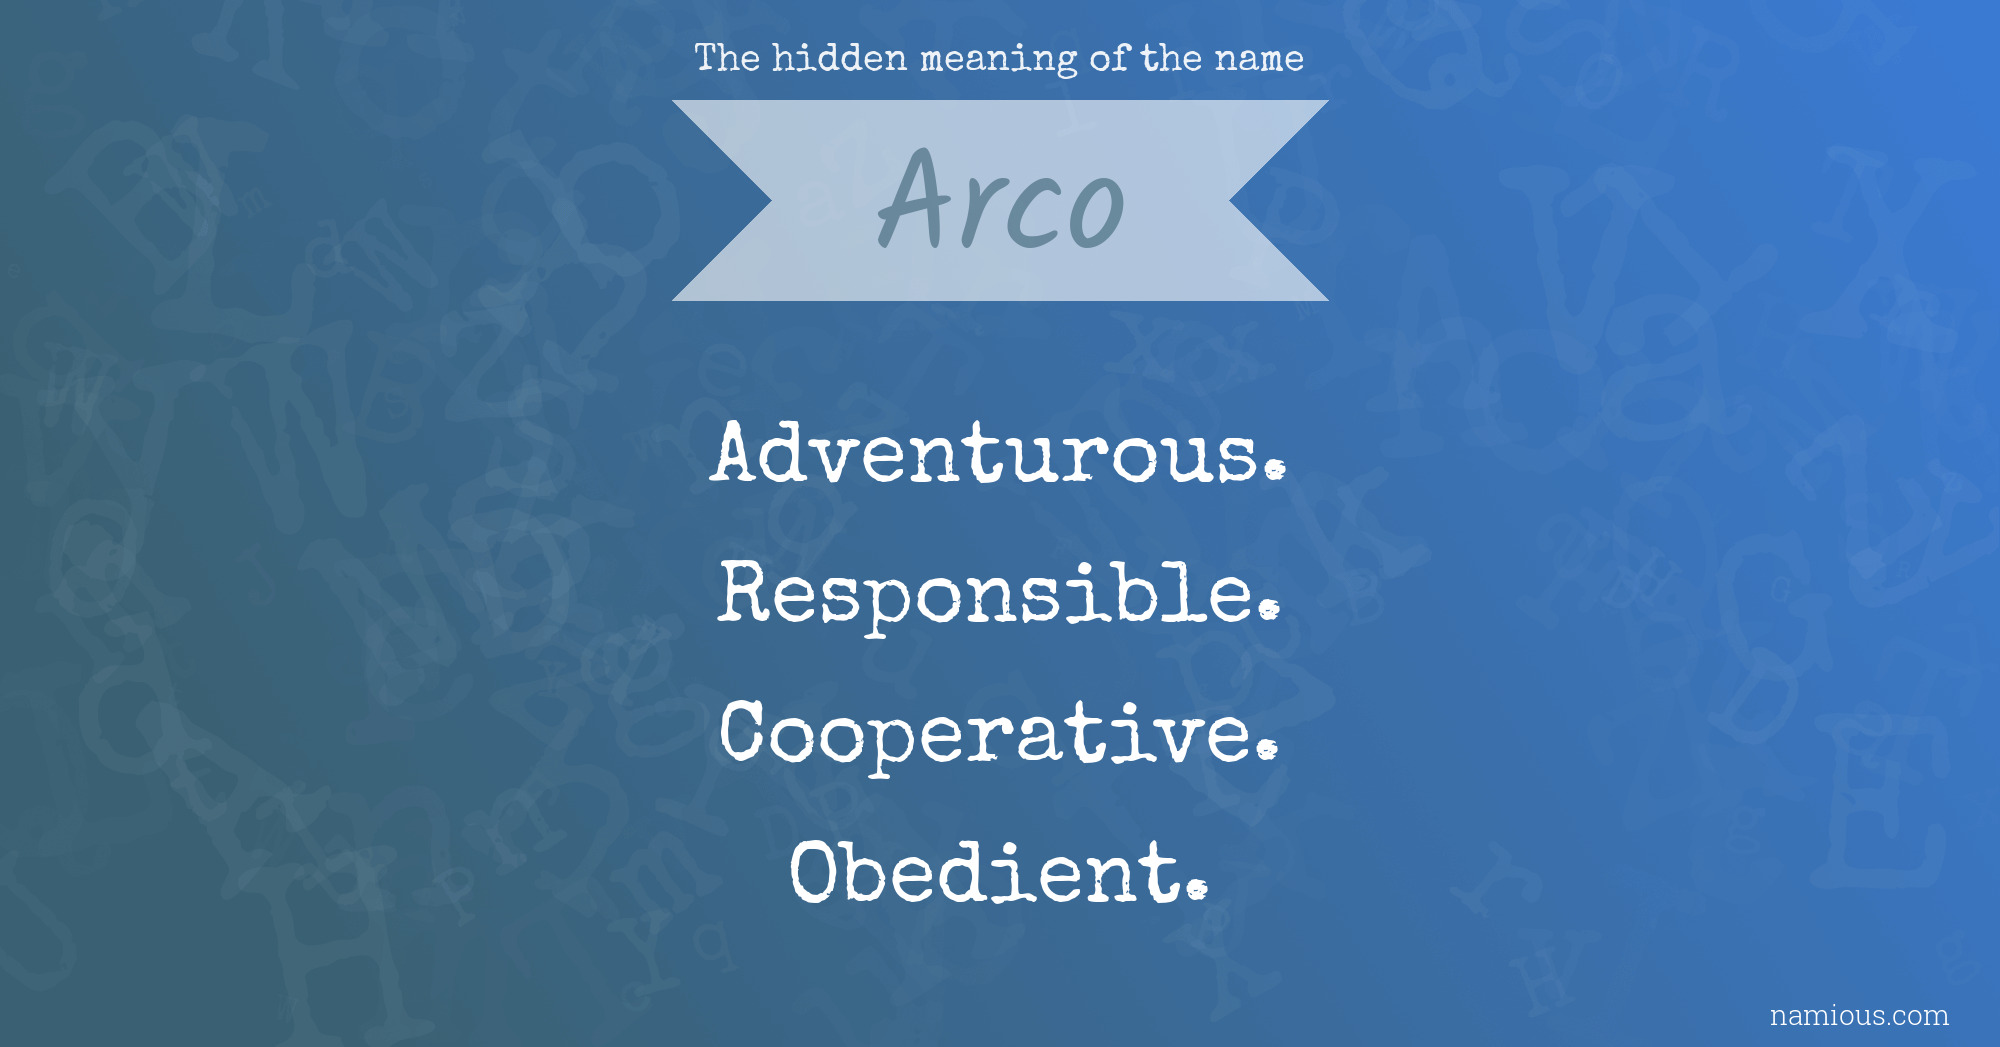 The hidden meaning of the name Arco